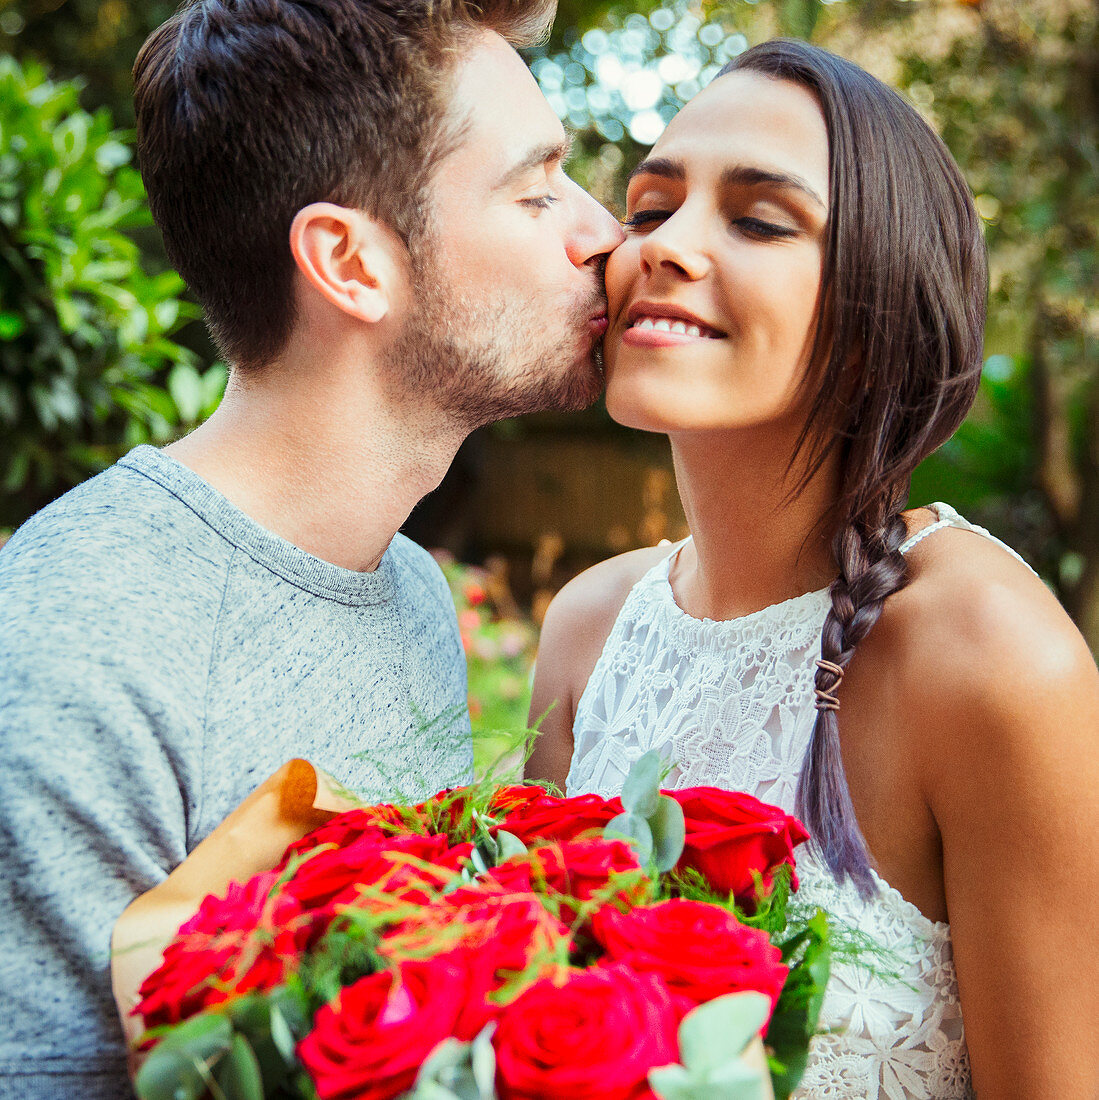 Man giving red rose bouquet to girlfriend